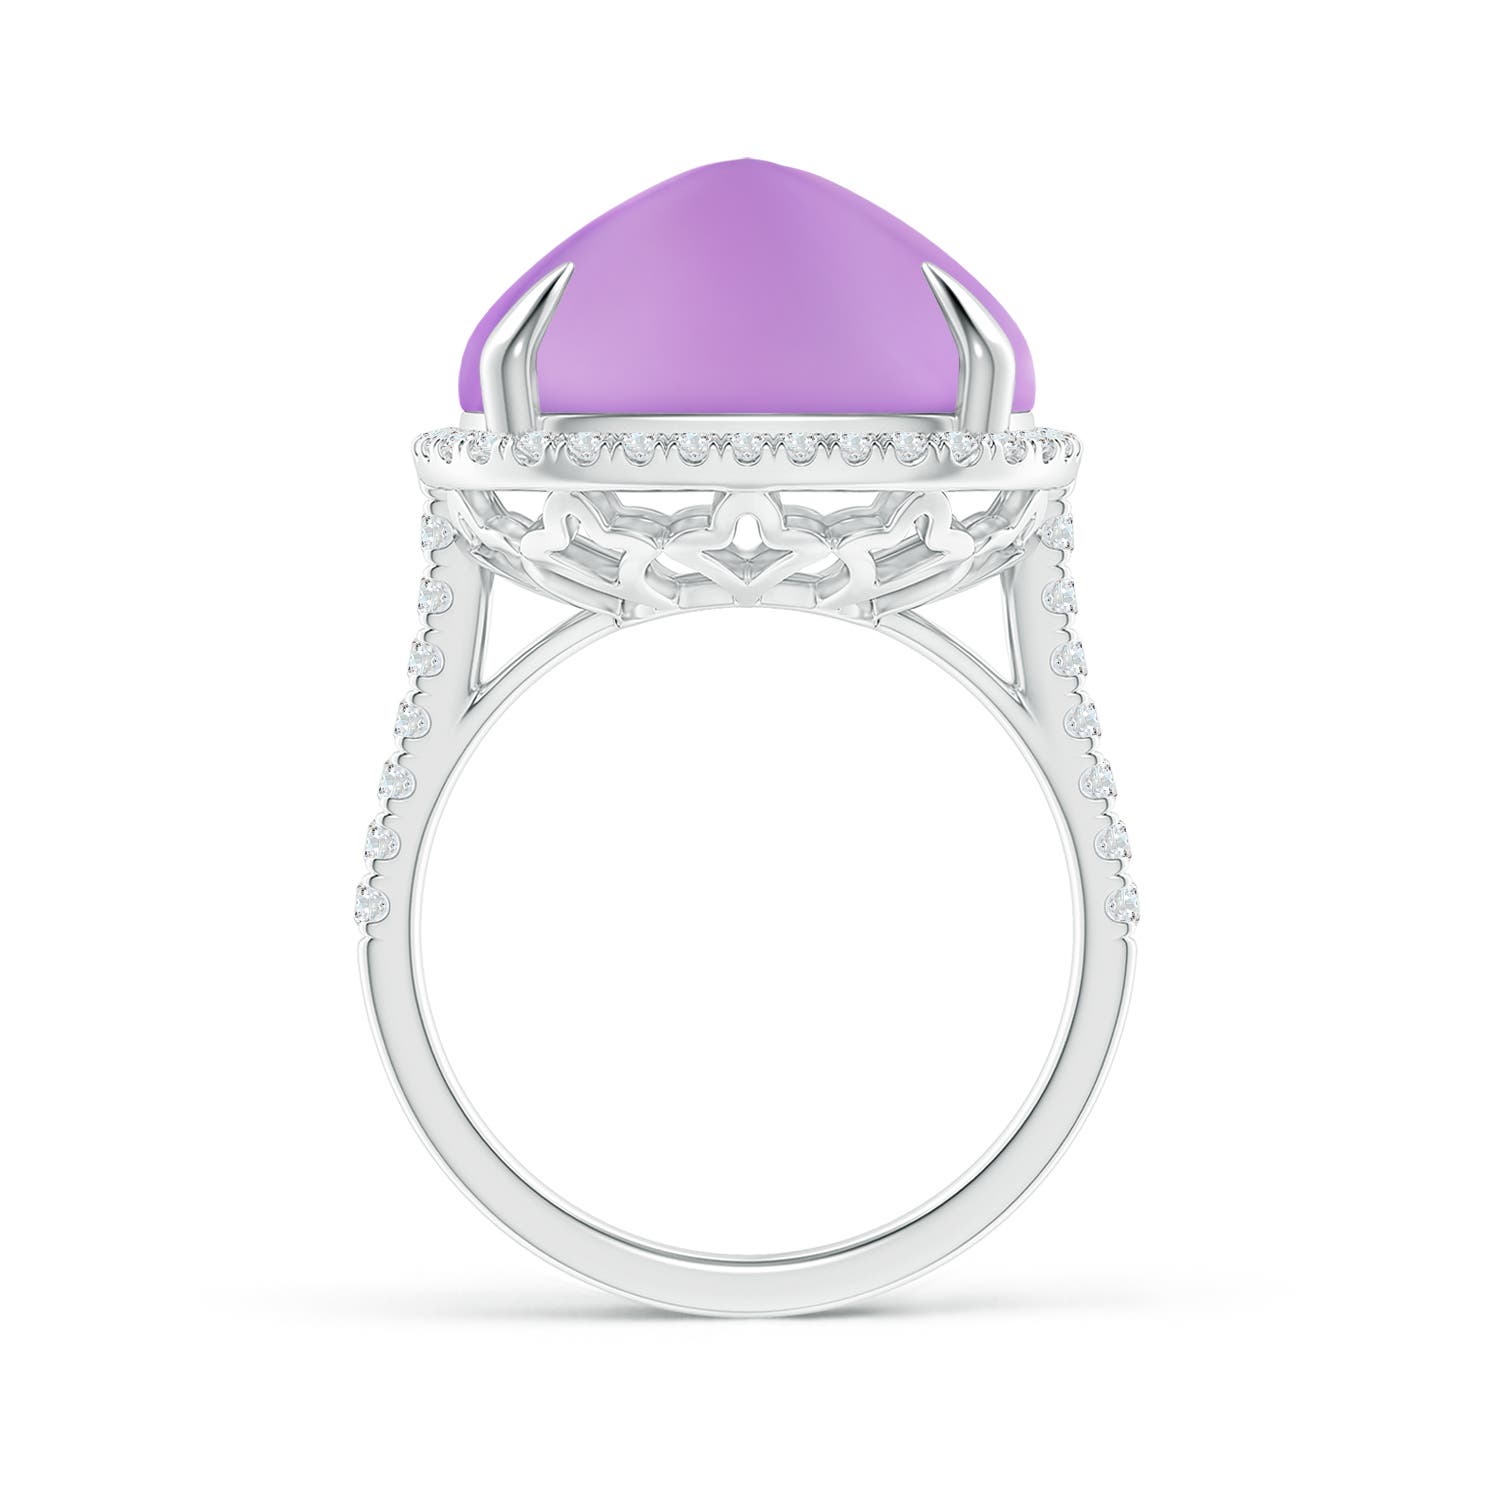 A - Amethyst / 16.02 CT / 14 KT White Gold